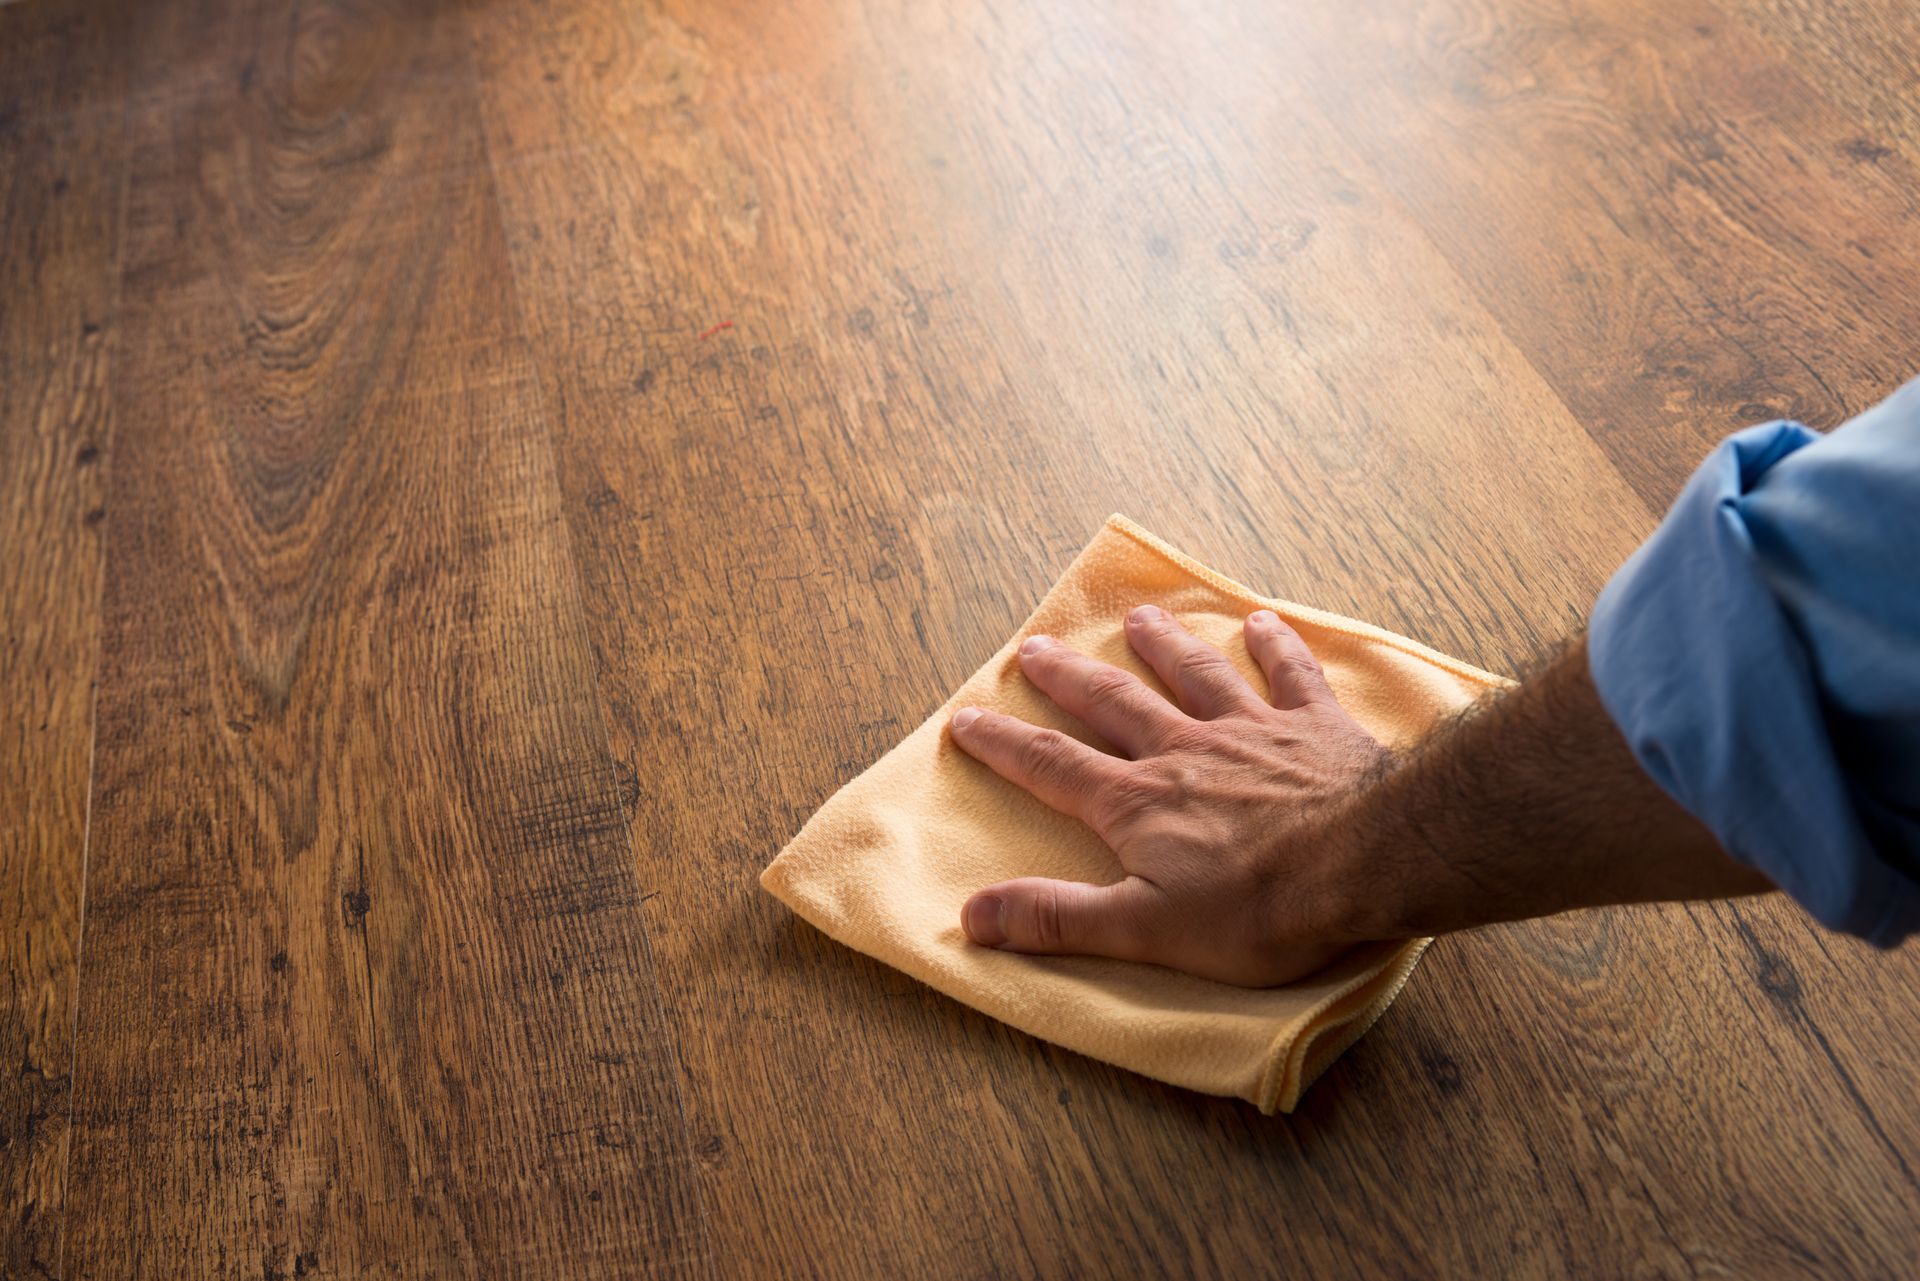 A person performing hardwood maintenance by gently polishing the floor using a soft cloth.